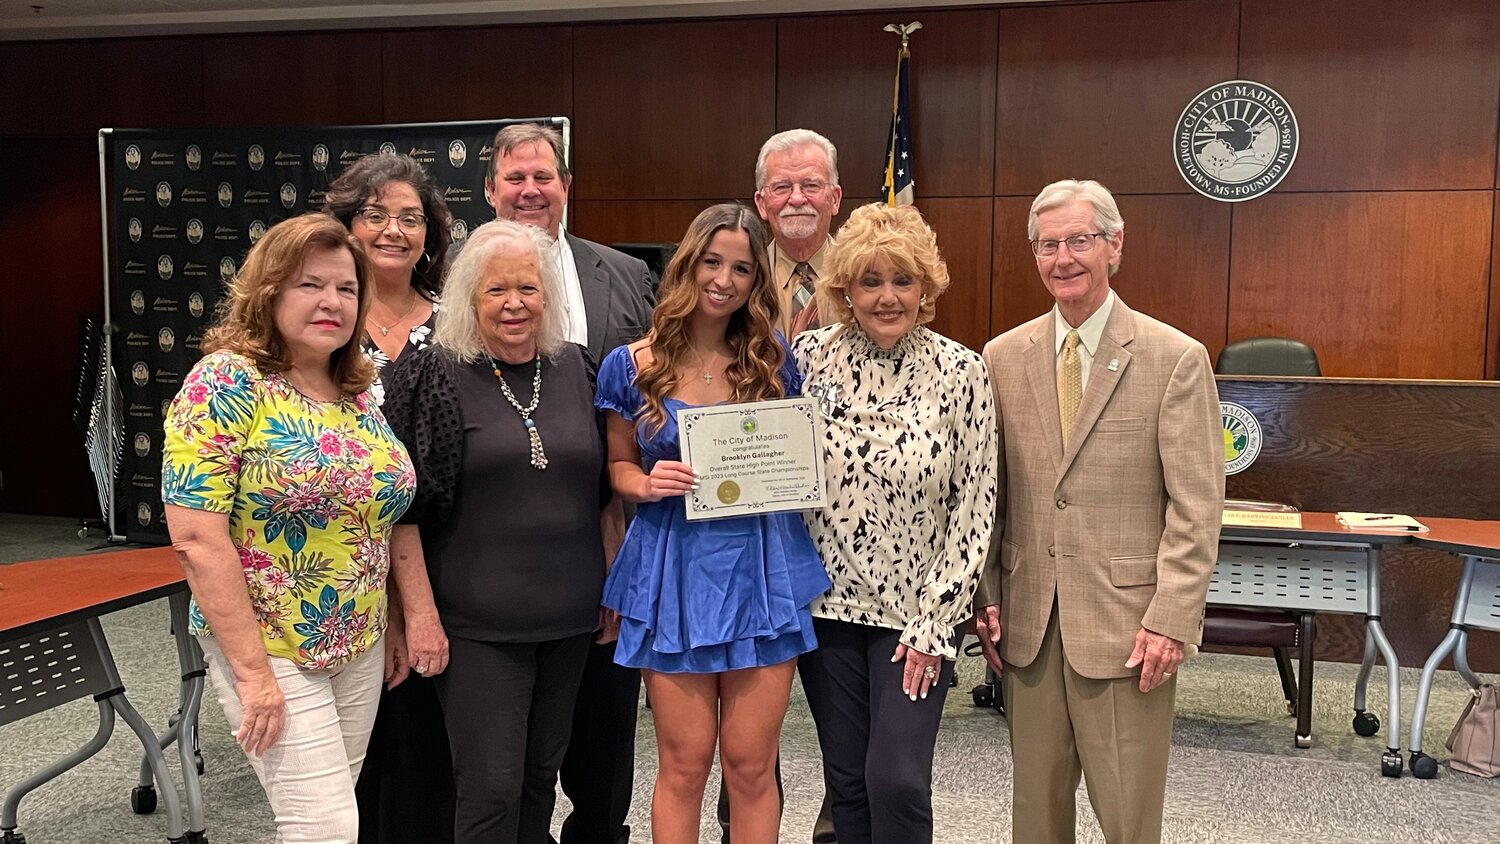 Madison’s Brooklyn Gallagher was recognized Tuesday night for her accomplishments during the 2023 Mississippi Swimming Long Course State Championship, where she took three first place wins for the Mississippi Makos. Mayor Mary Hawkins Butler recognized her accomplishments and presented Gallagher with a certificate. Pictured, from left: Alderwoman Pat Peeler, Alderman-at-Large Sandra Strain, Alderwoman Tawanna Tatum, Alderman Mike Hudgins, Brooklyn Gallagher, Alderman Paul Tankersley, Mayor Mary Hawkins-Butler, and Alderman Guy Bowering.